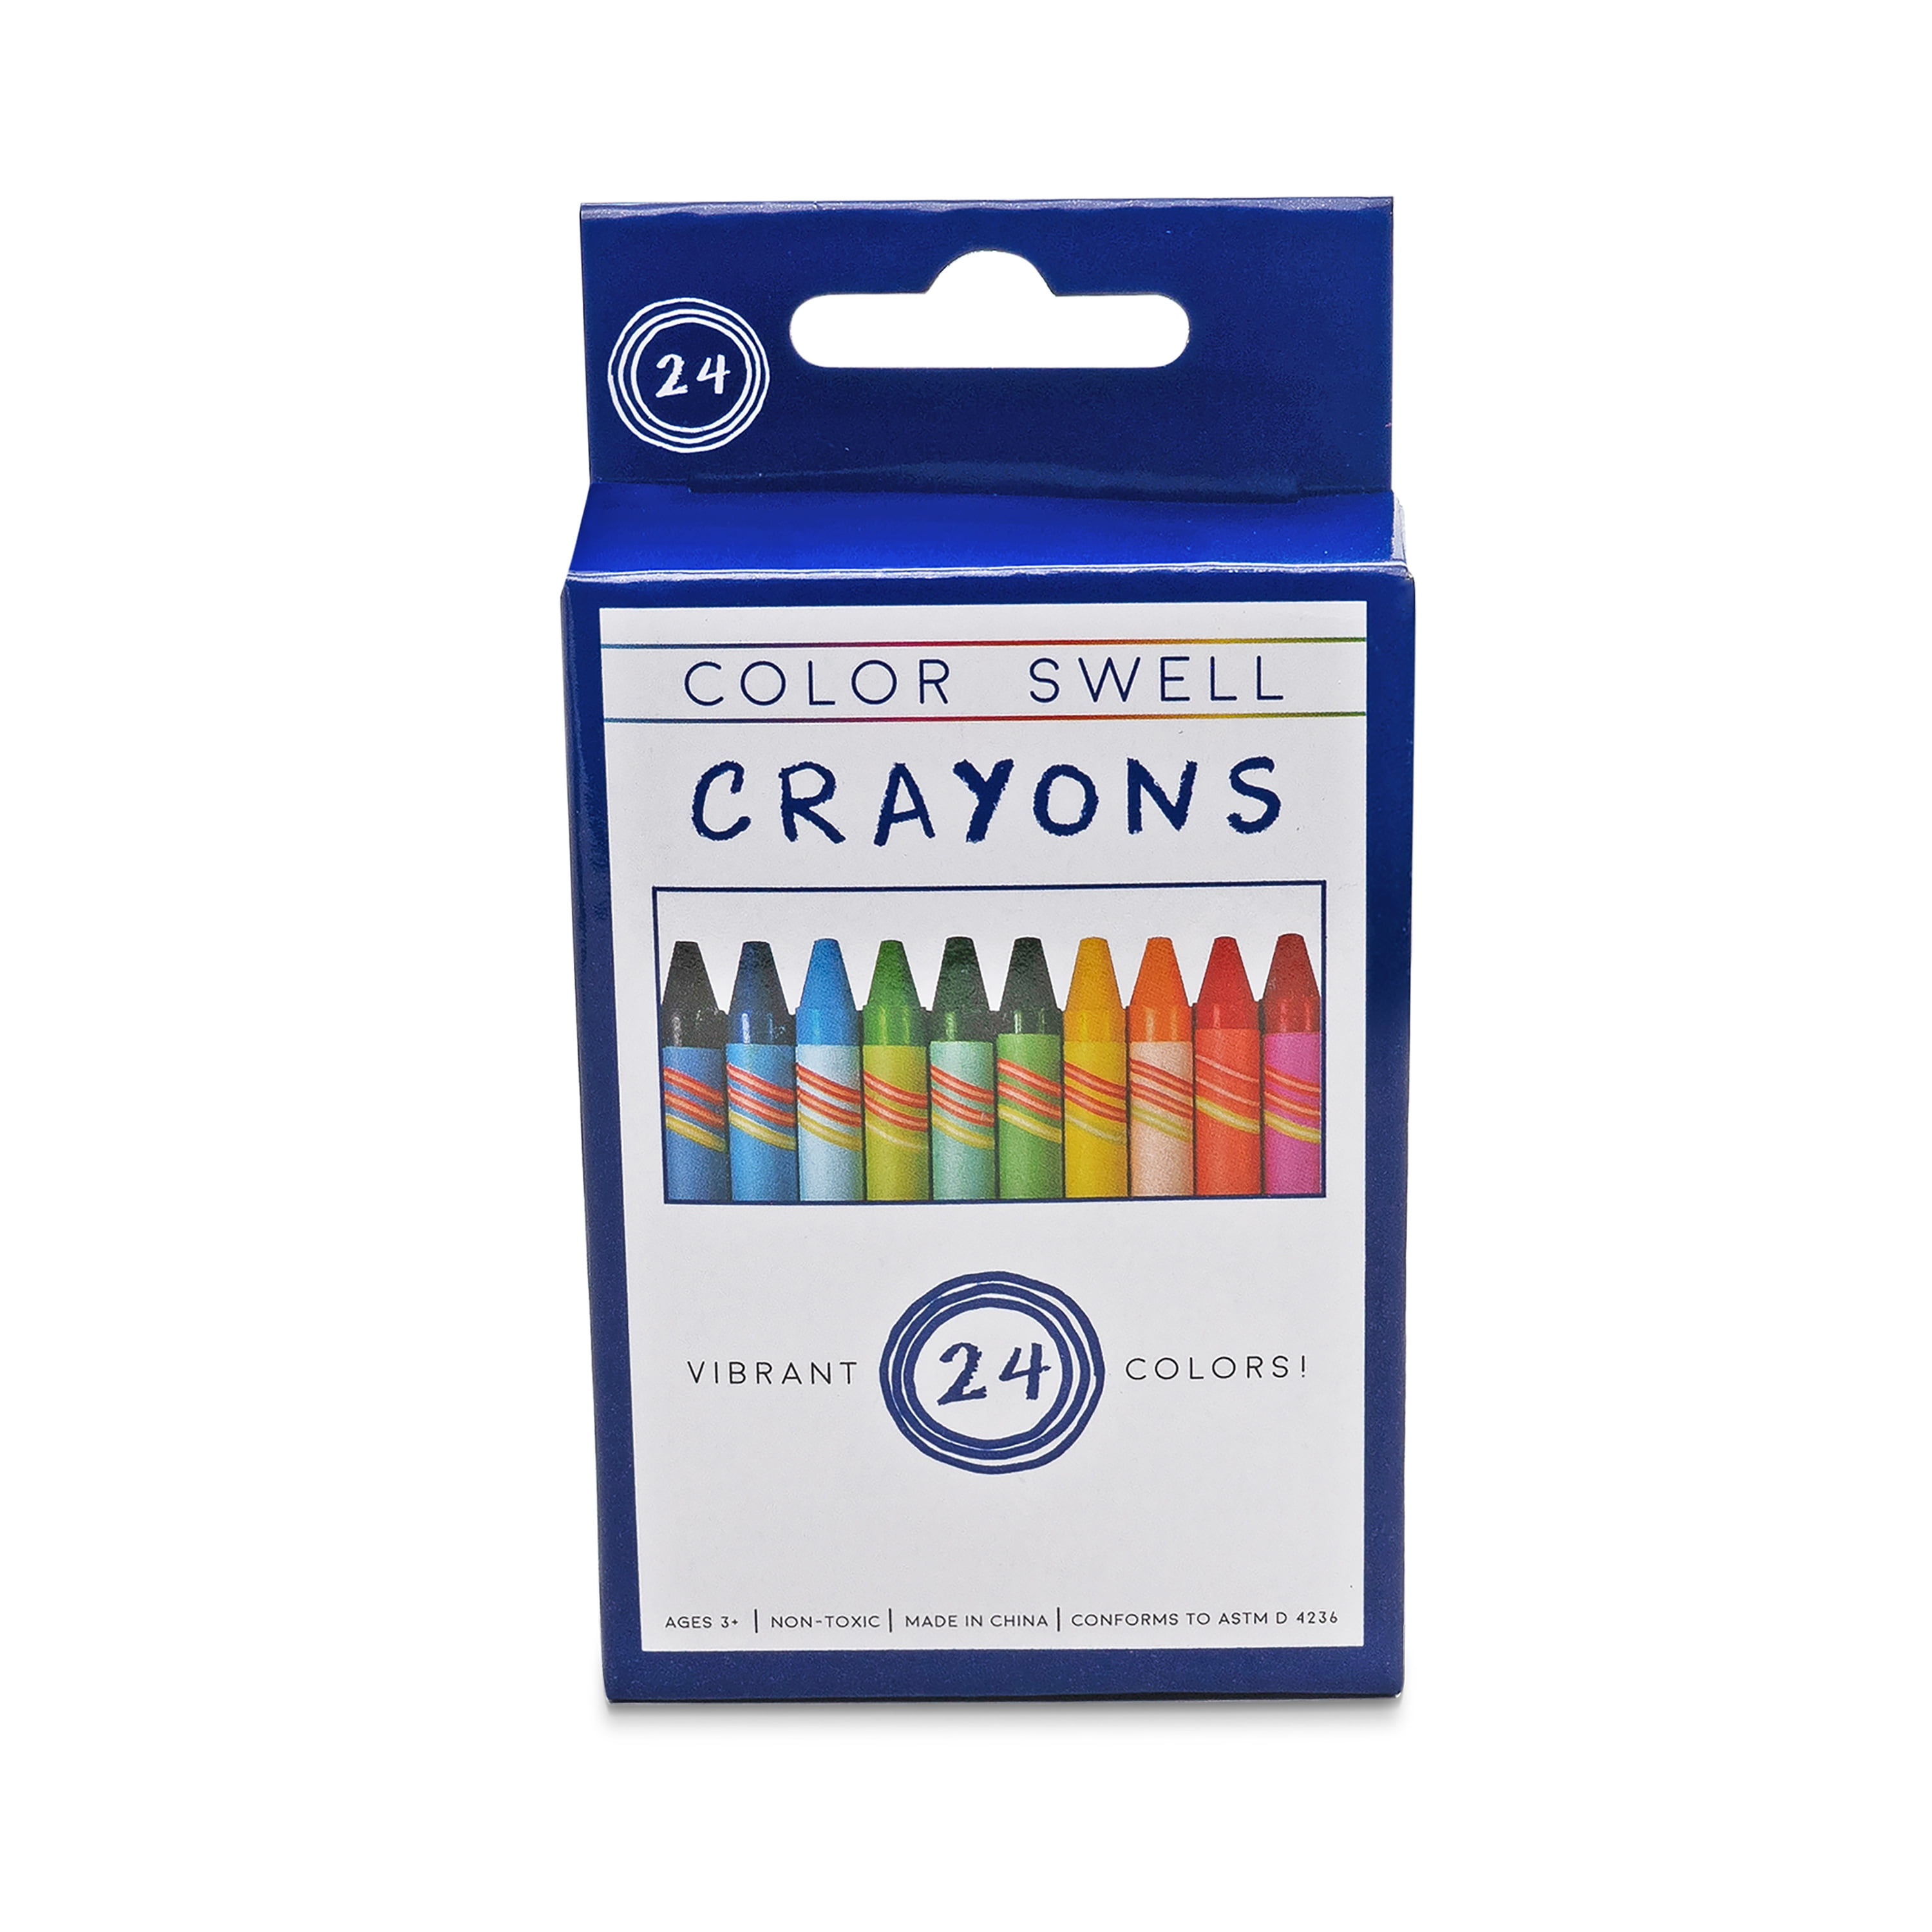 Bulk Crayons 6 lbs Whole & Broken Crafts Melting Art All The Colors